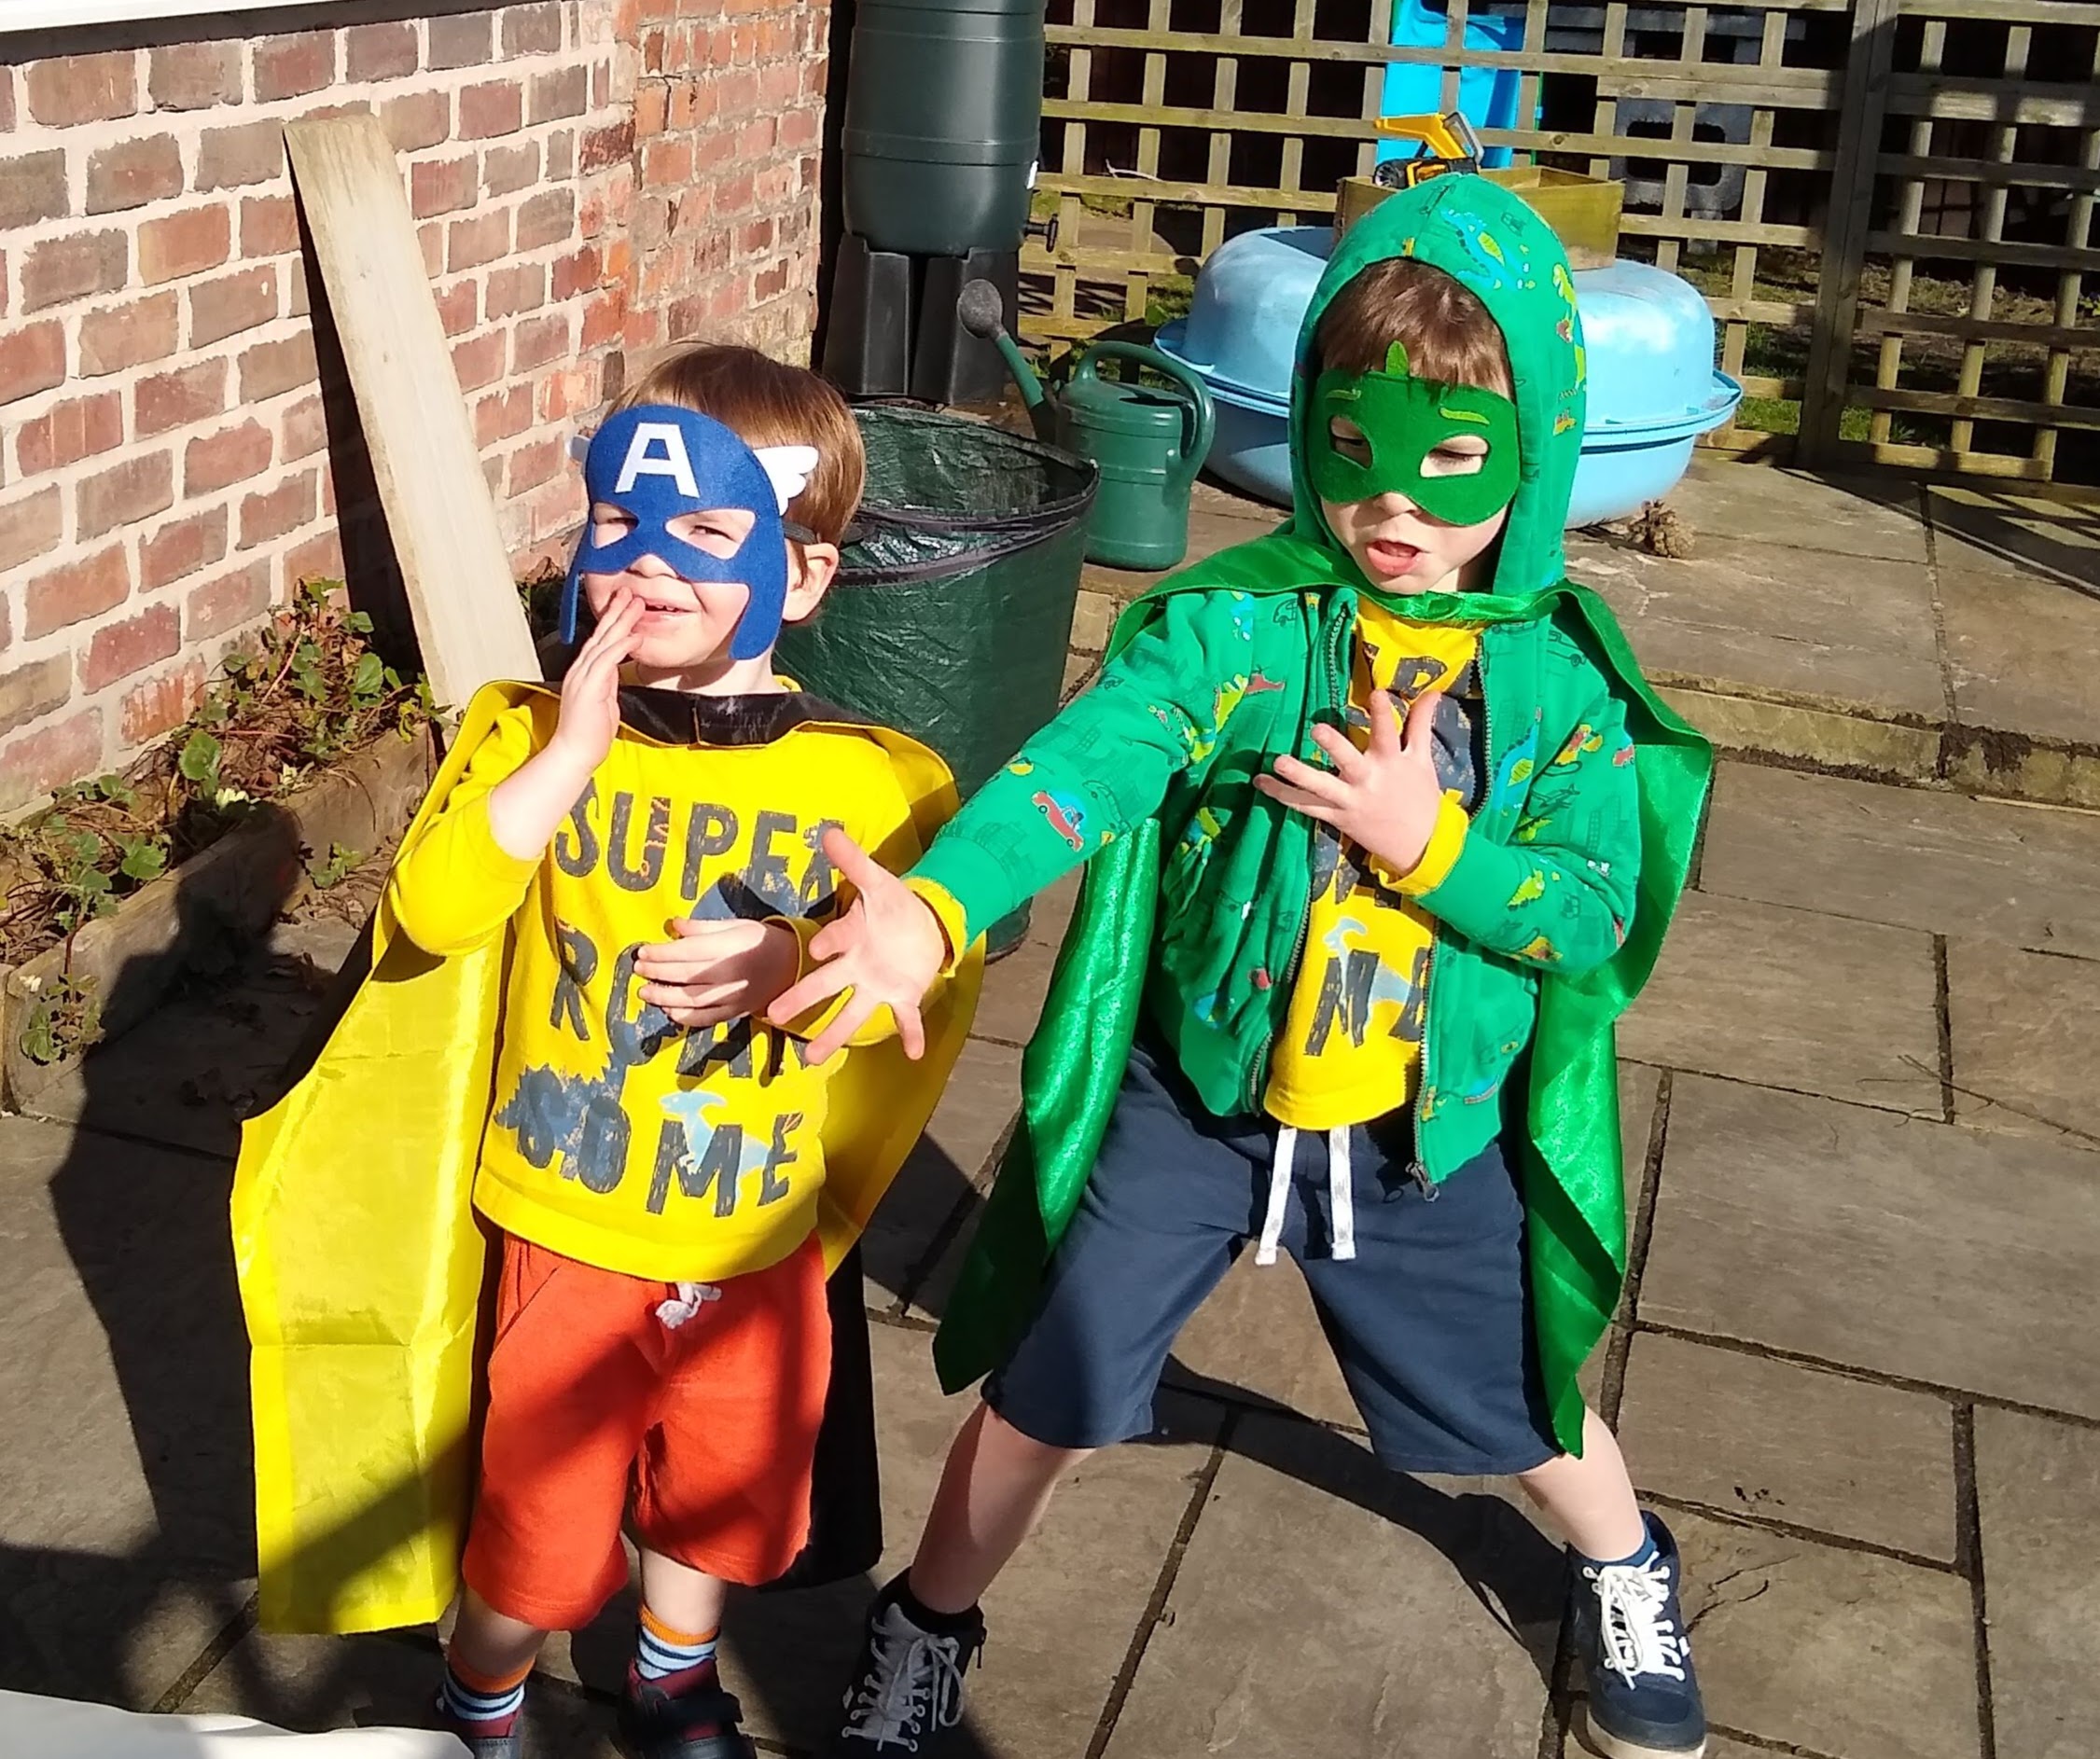 Two boys - brothers satd in super hero poses in mismatched masks and capes.